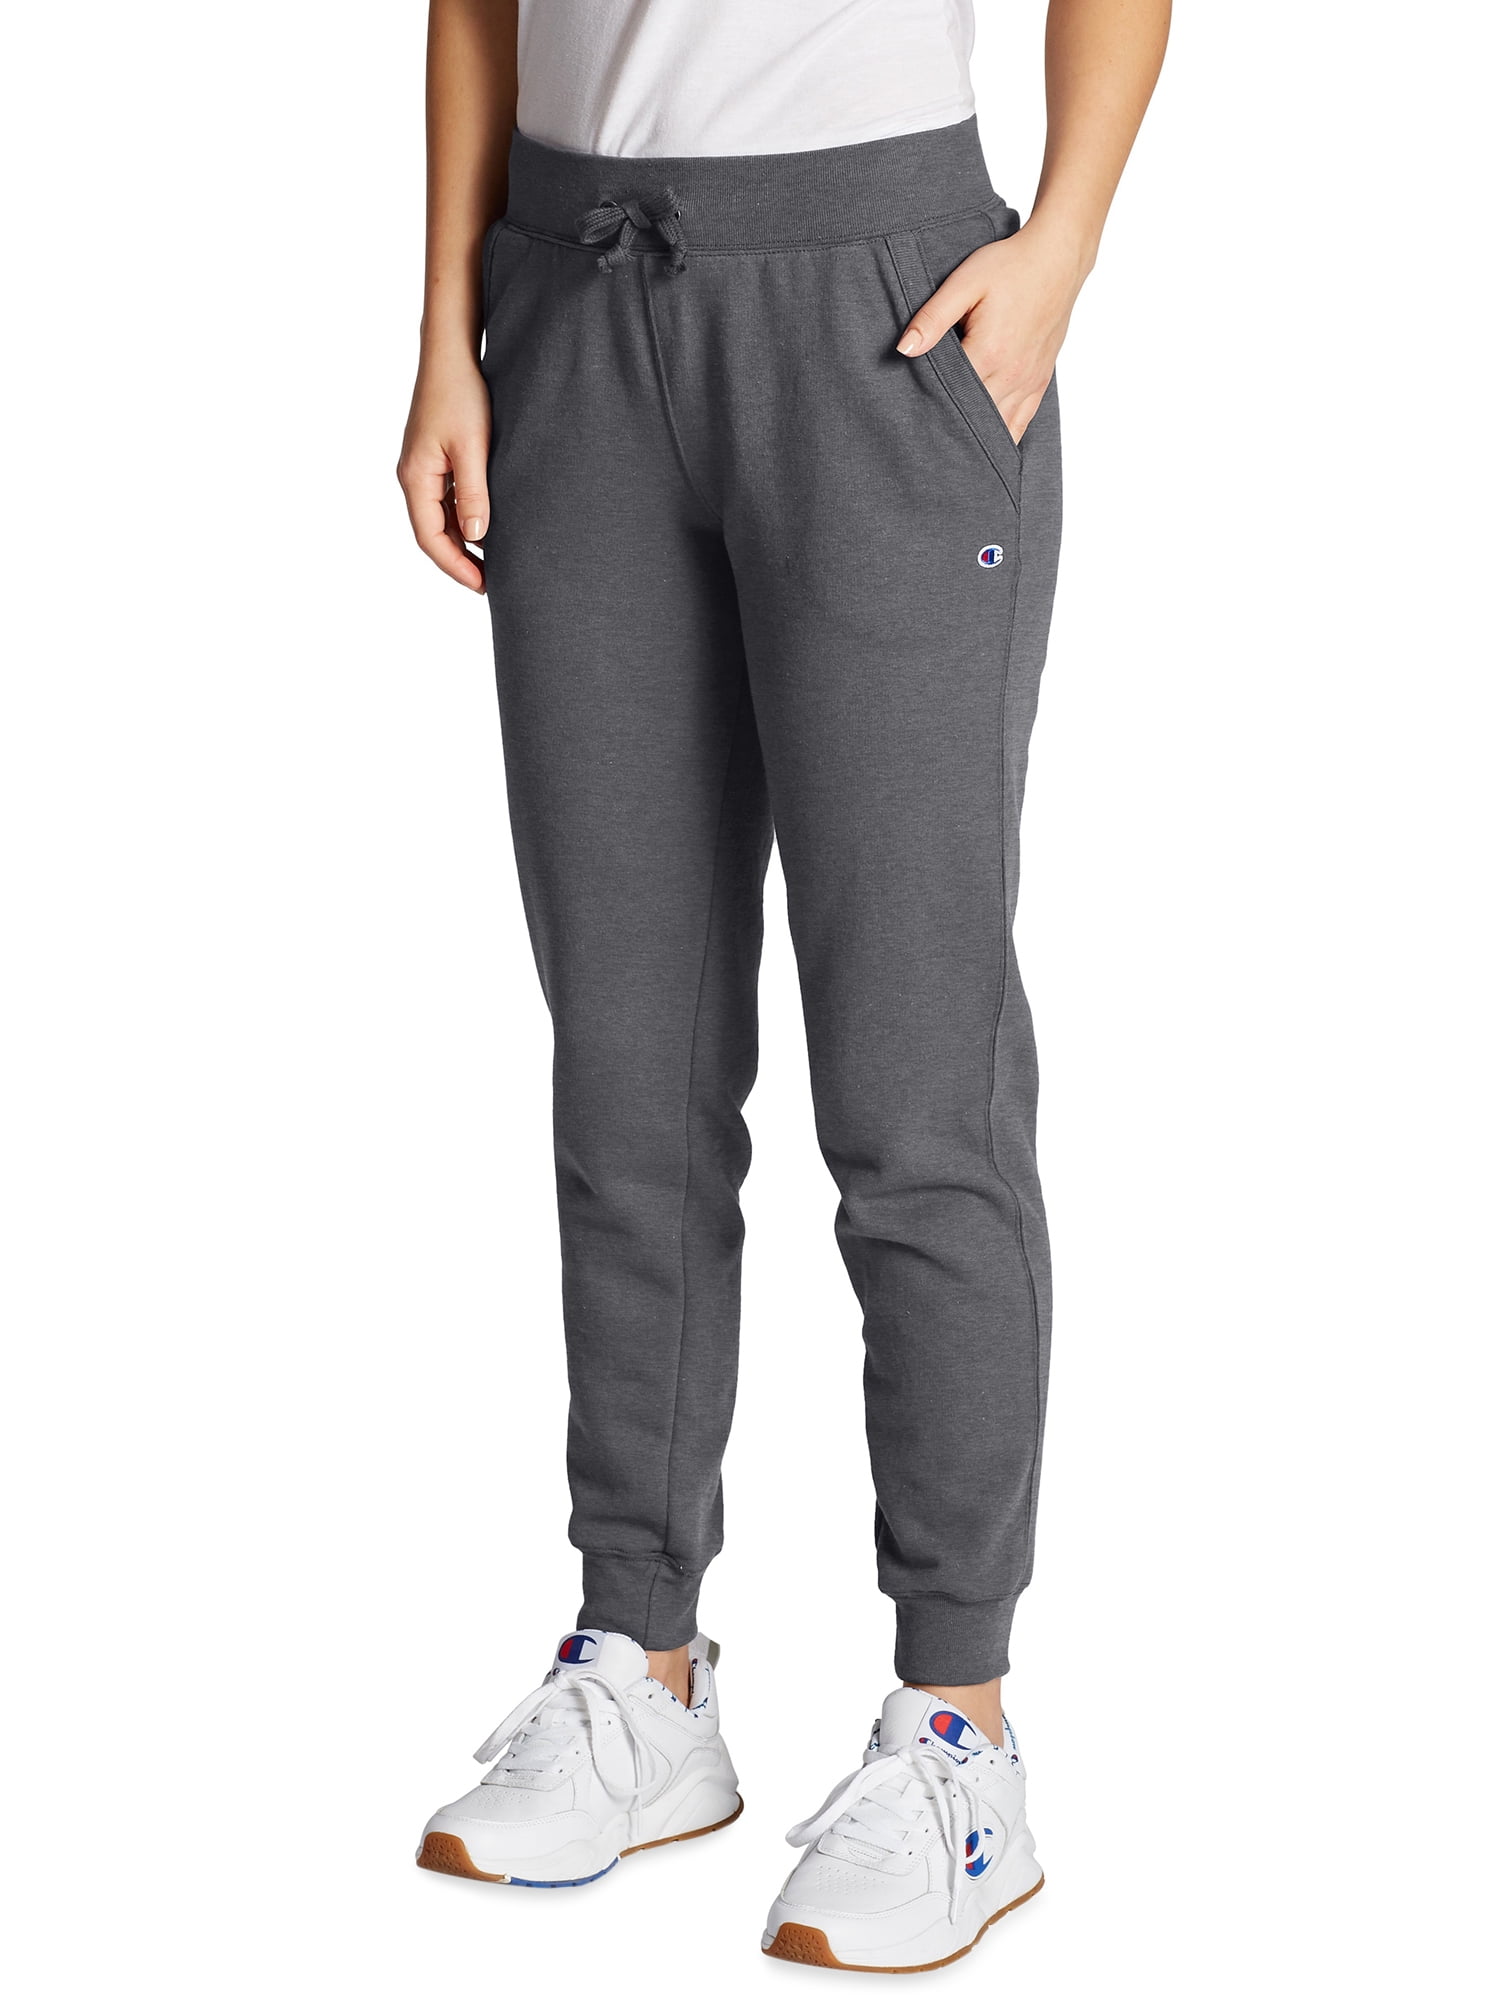 Sweatpants for Women with Pockets-Yoga Hiking Athletic Workout Running Pants Grey, Large Hi Clasmix Women's Joggers 